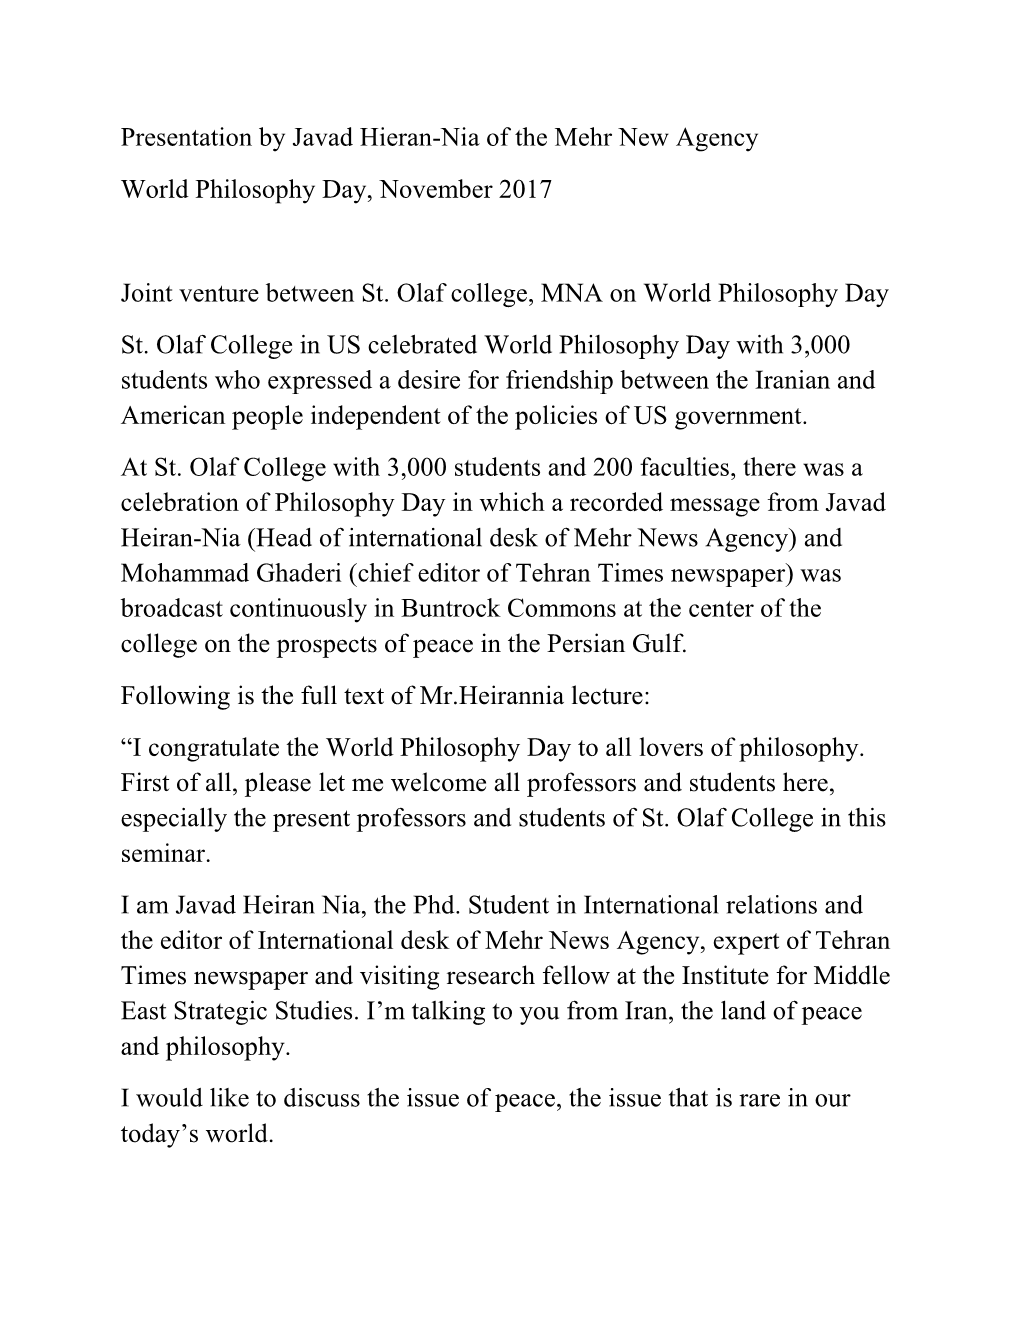 Presentation by Javad Hieran-Nia of the Mehr New Agency World Philosophy Day, November 2017